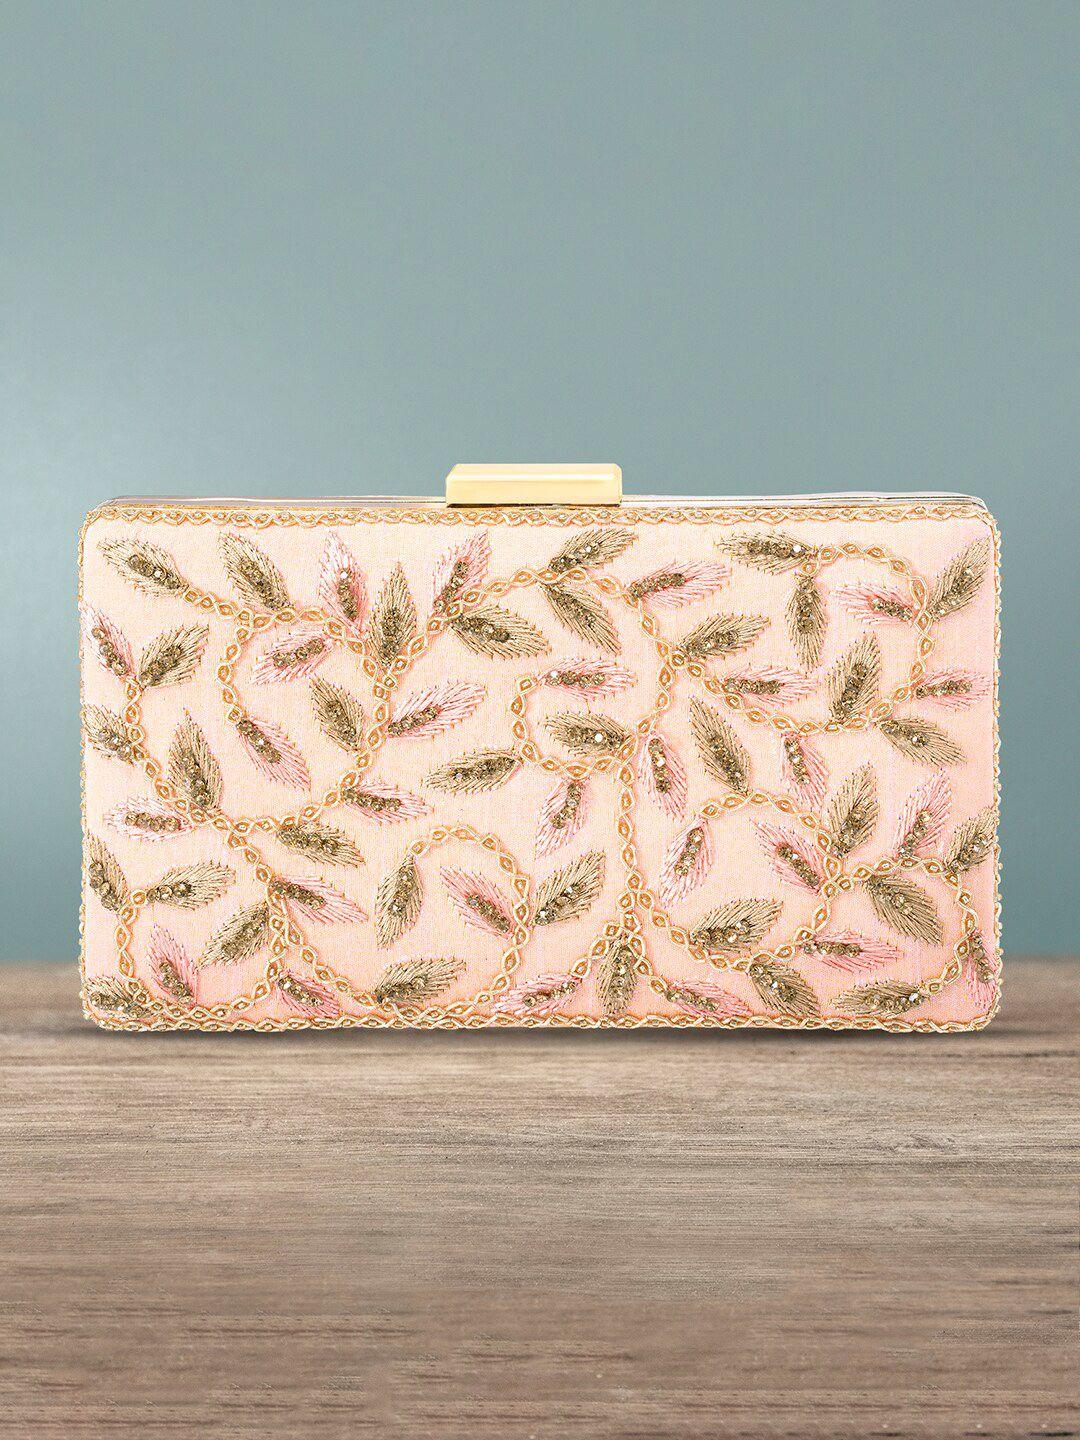 peora peach-coloured & gold-toned embroidered purse clutch